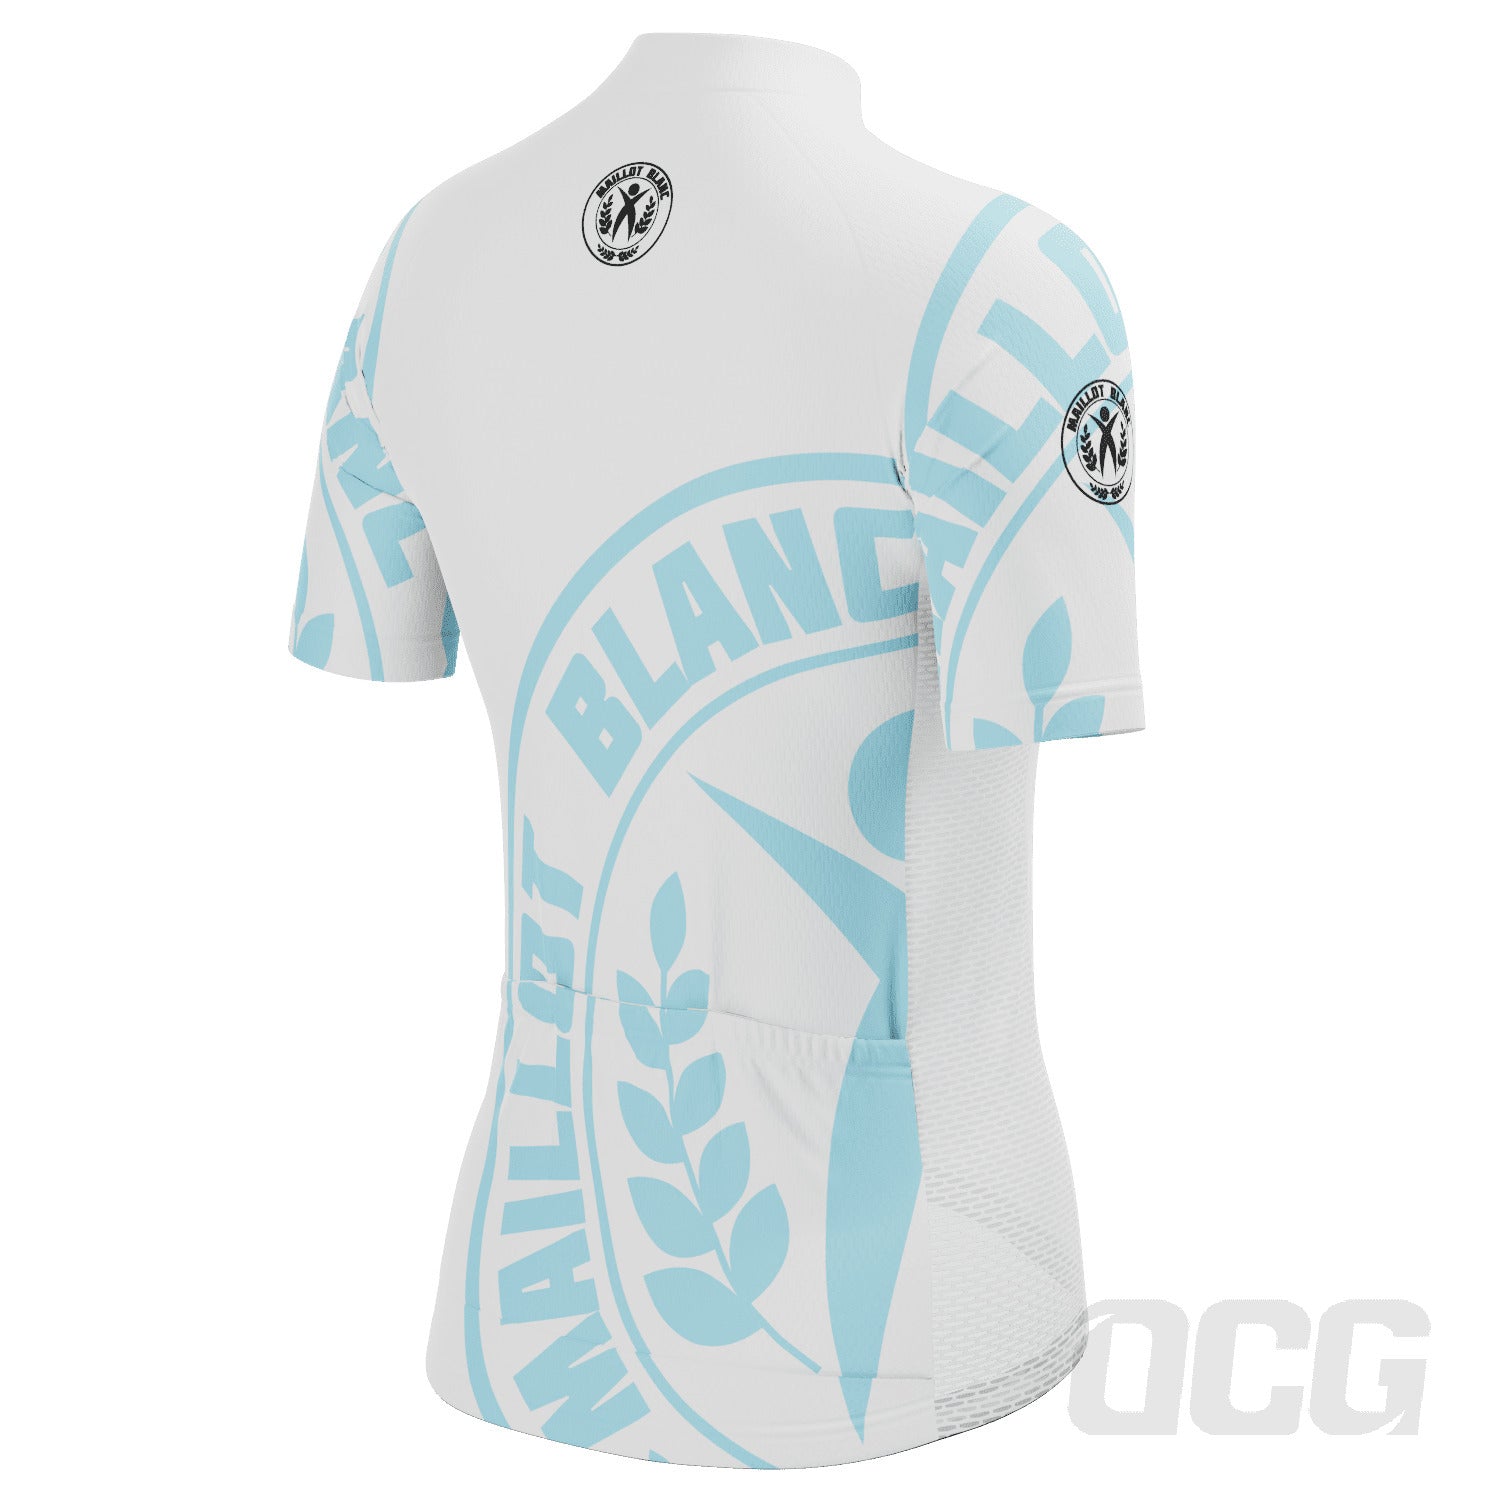 Women's Tour de France Young Rider Maillot Blanc Short Sleeve Cycling Jersey